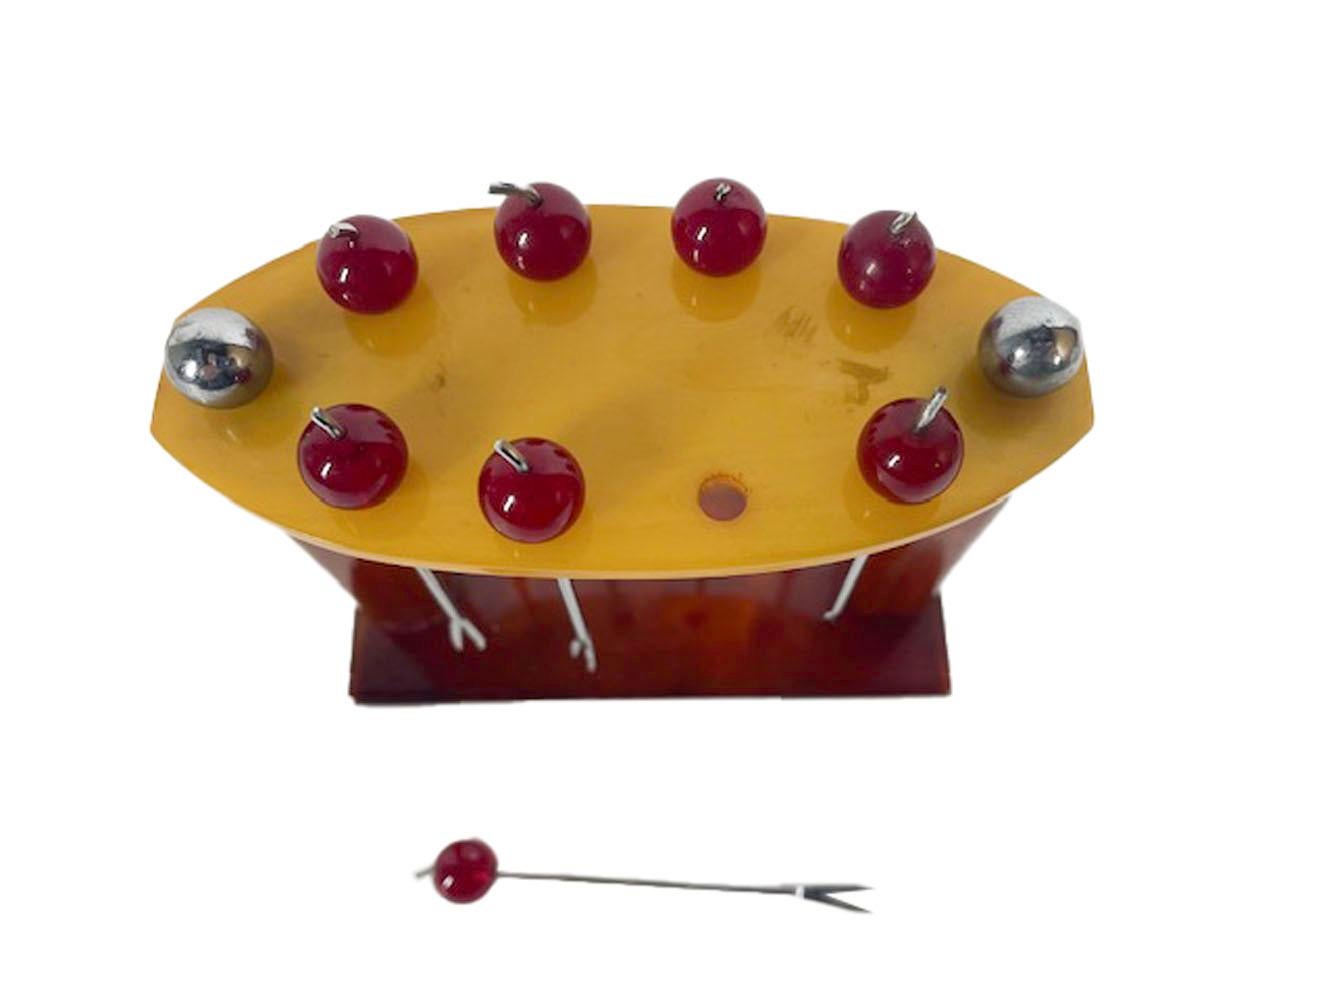 French Art Deco cocktail picks and stand. Eight chrome plated forked picks with translucent red cherry tops in a faux tortoise Bakelite stand with pierced butterscotch Bakelite top-plate held in place with chromed ball finials.